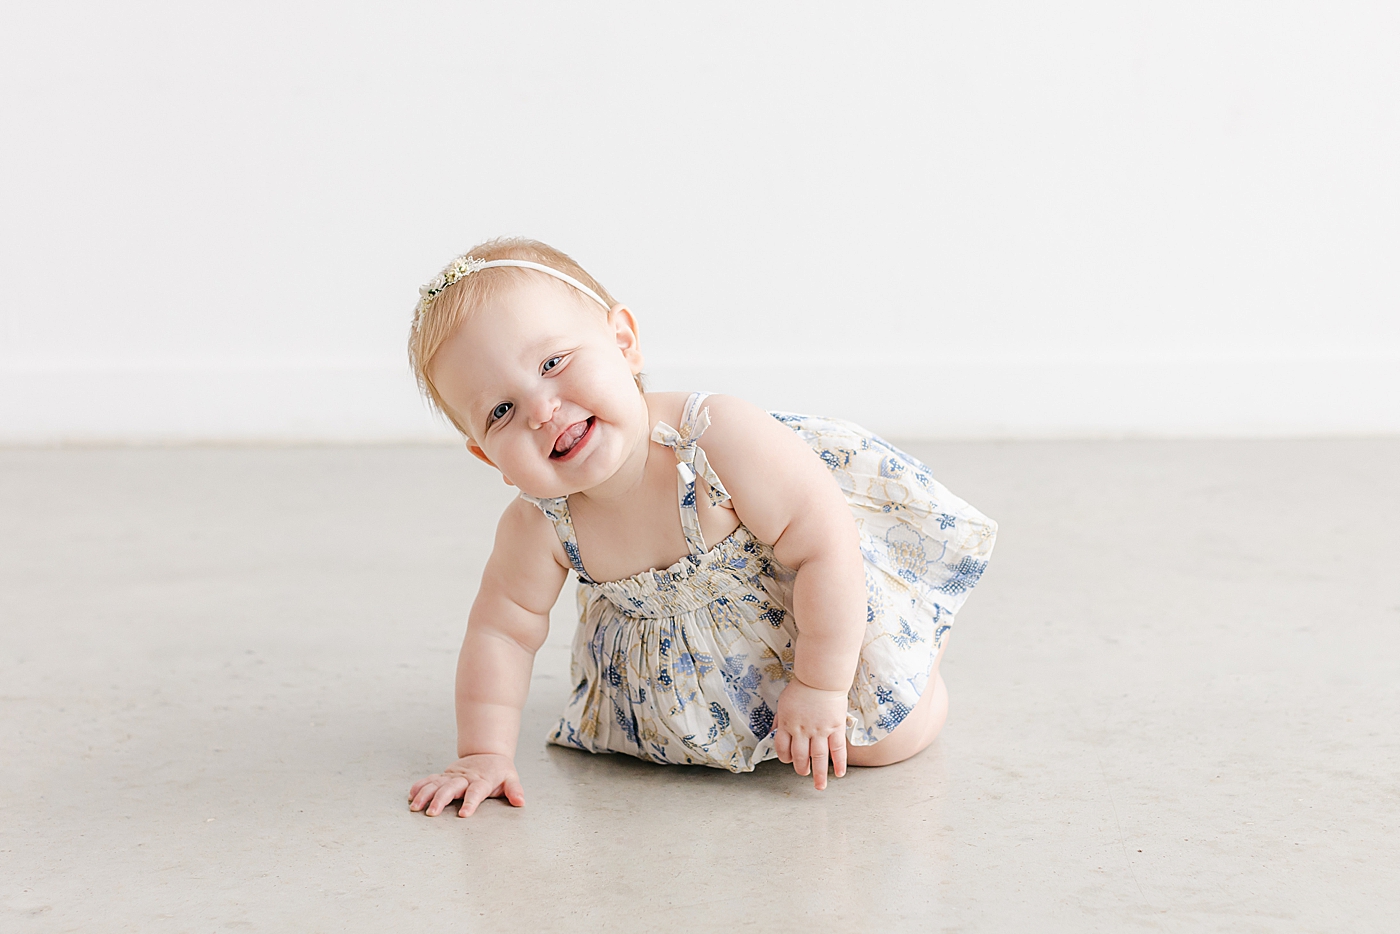 Baby girl in a floral print dress smiling | Photo by Sana Ahmed Photography